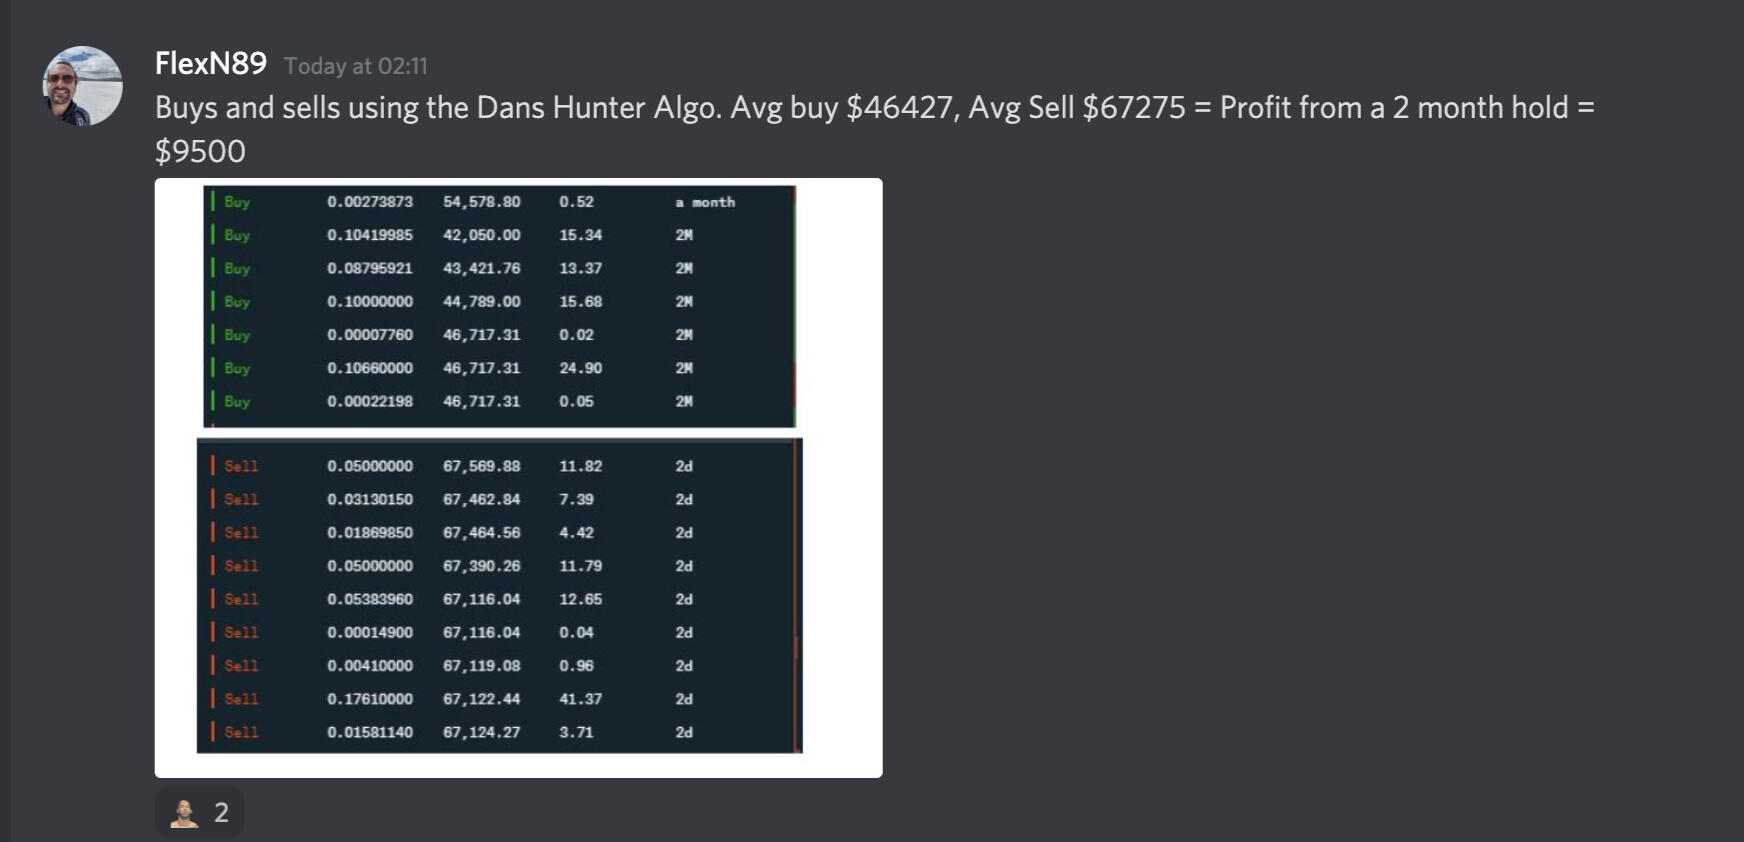 Buy and sell using Dans Profit Hunter Algo created $9500 profit in 2 months